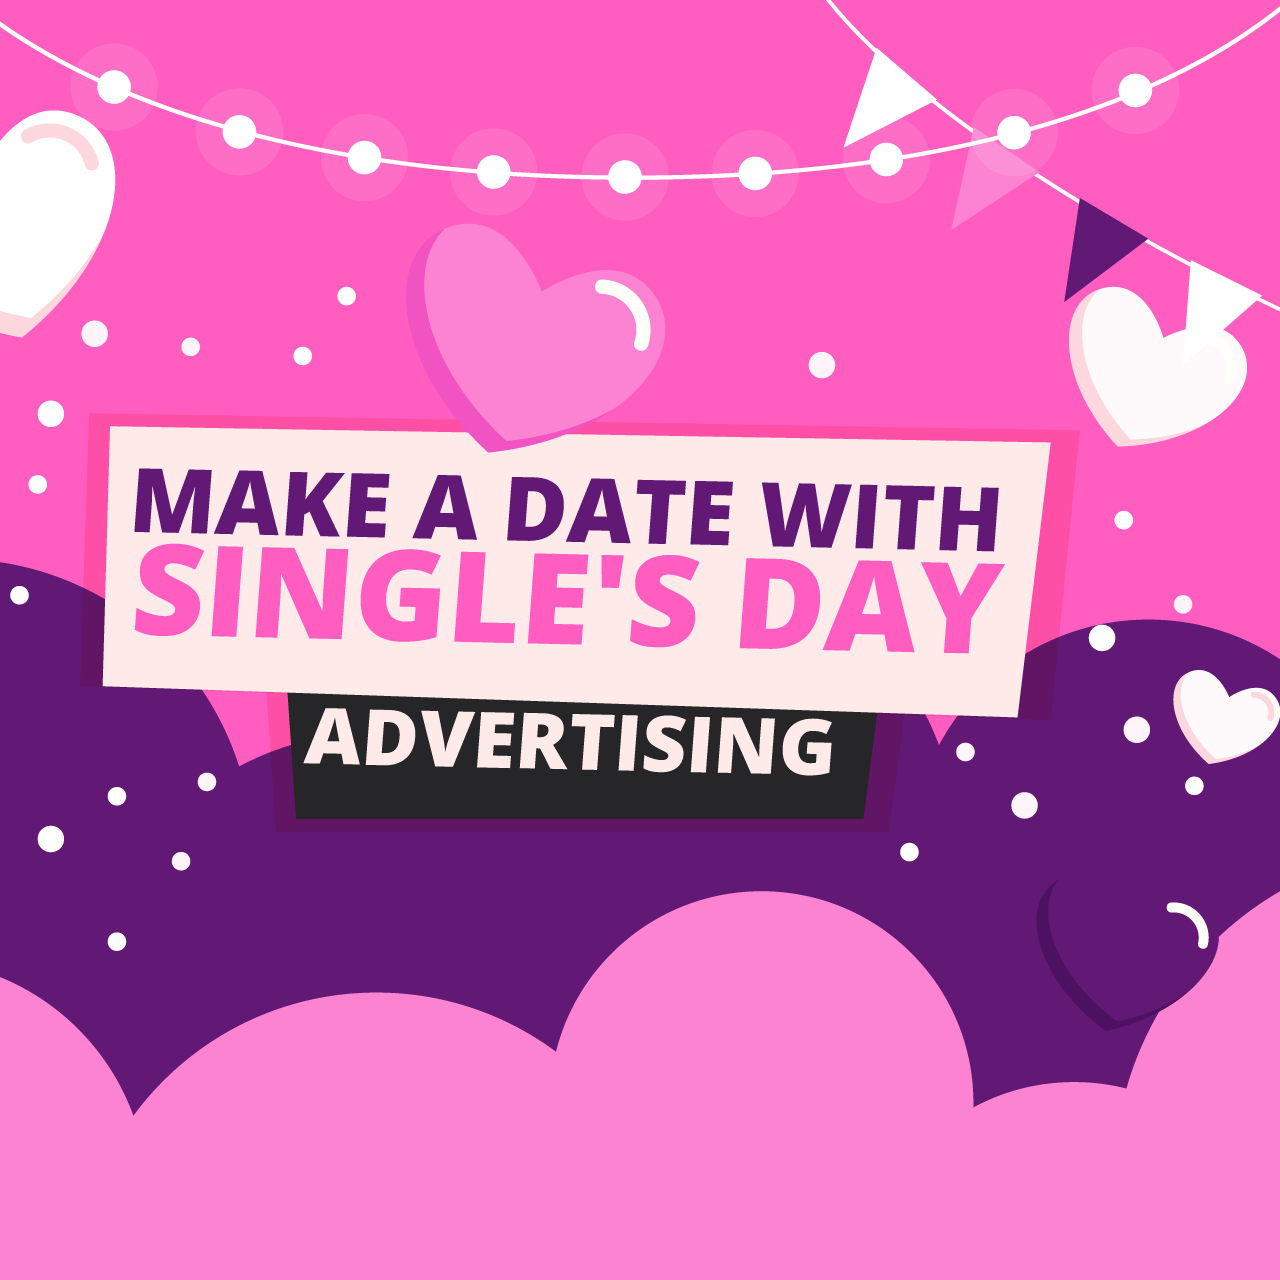 make-a-date-with-singles-day-image-pack_banner-latest-teaser-png.45228